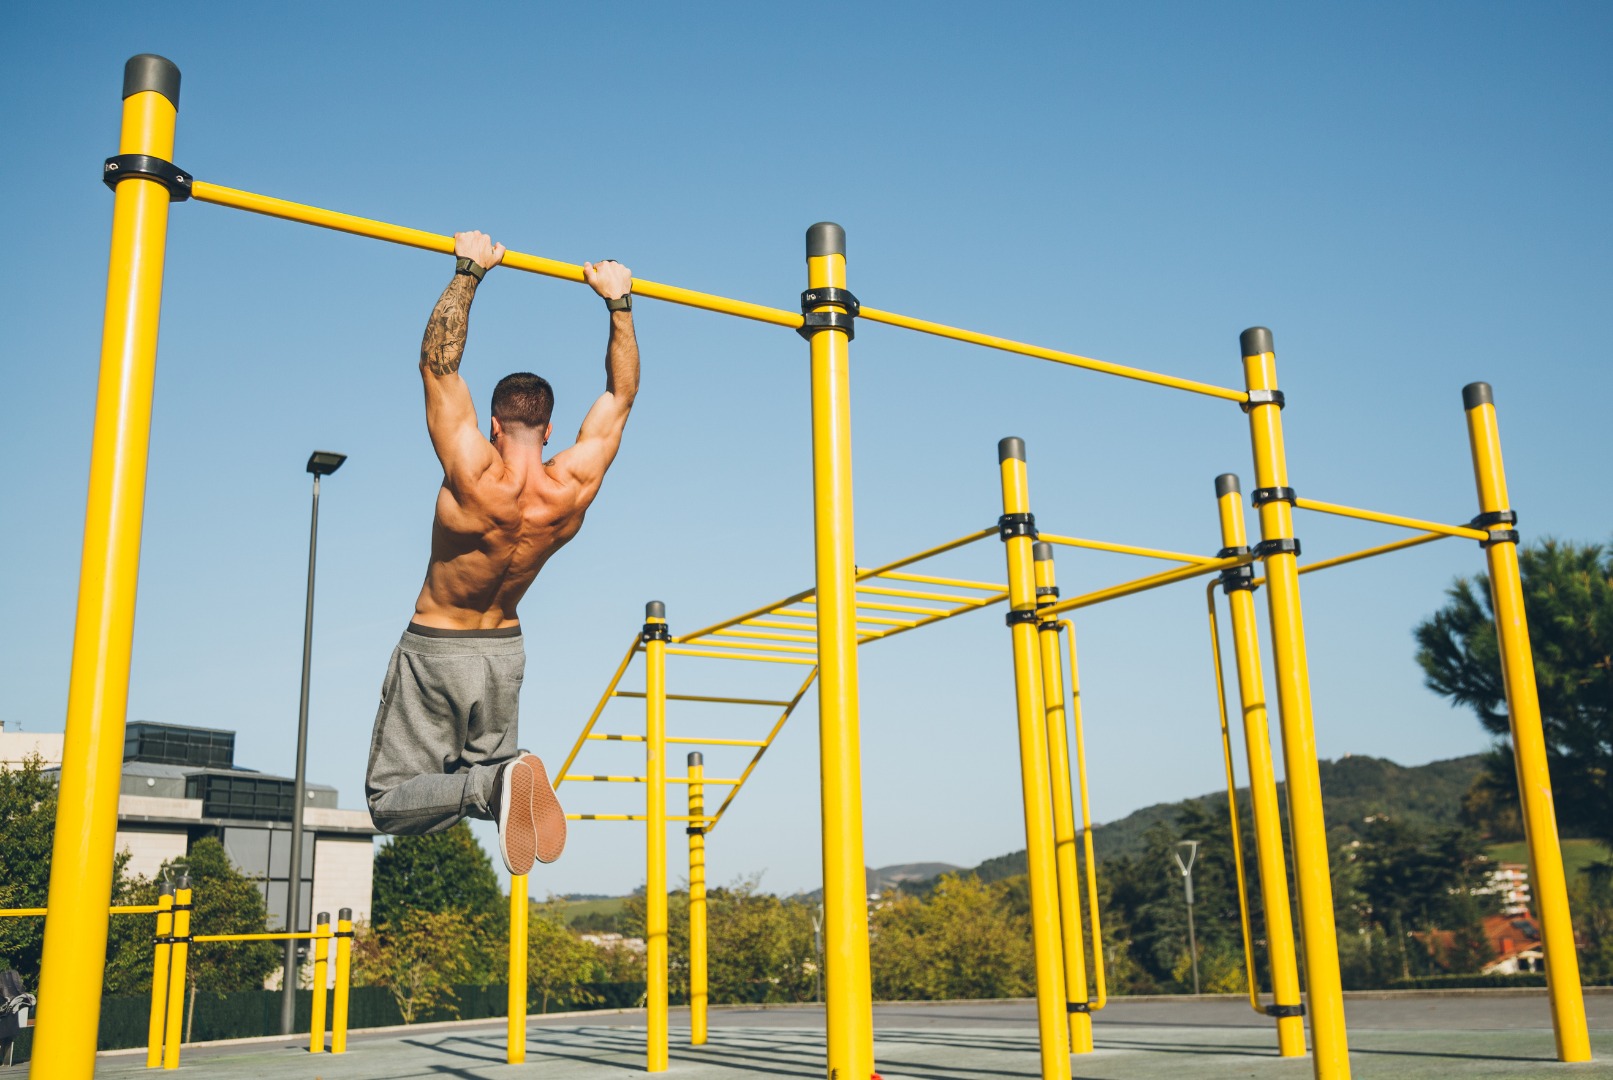 Calisthenics Parks - Street Workout Spots Map - Home of the bars